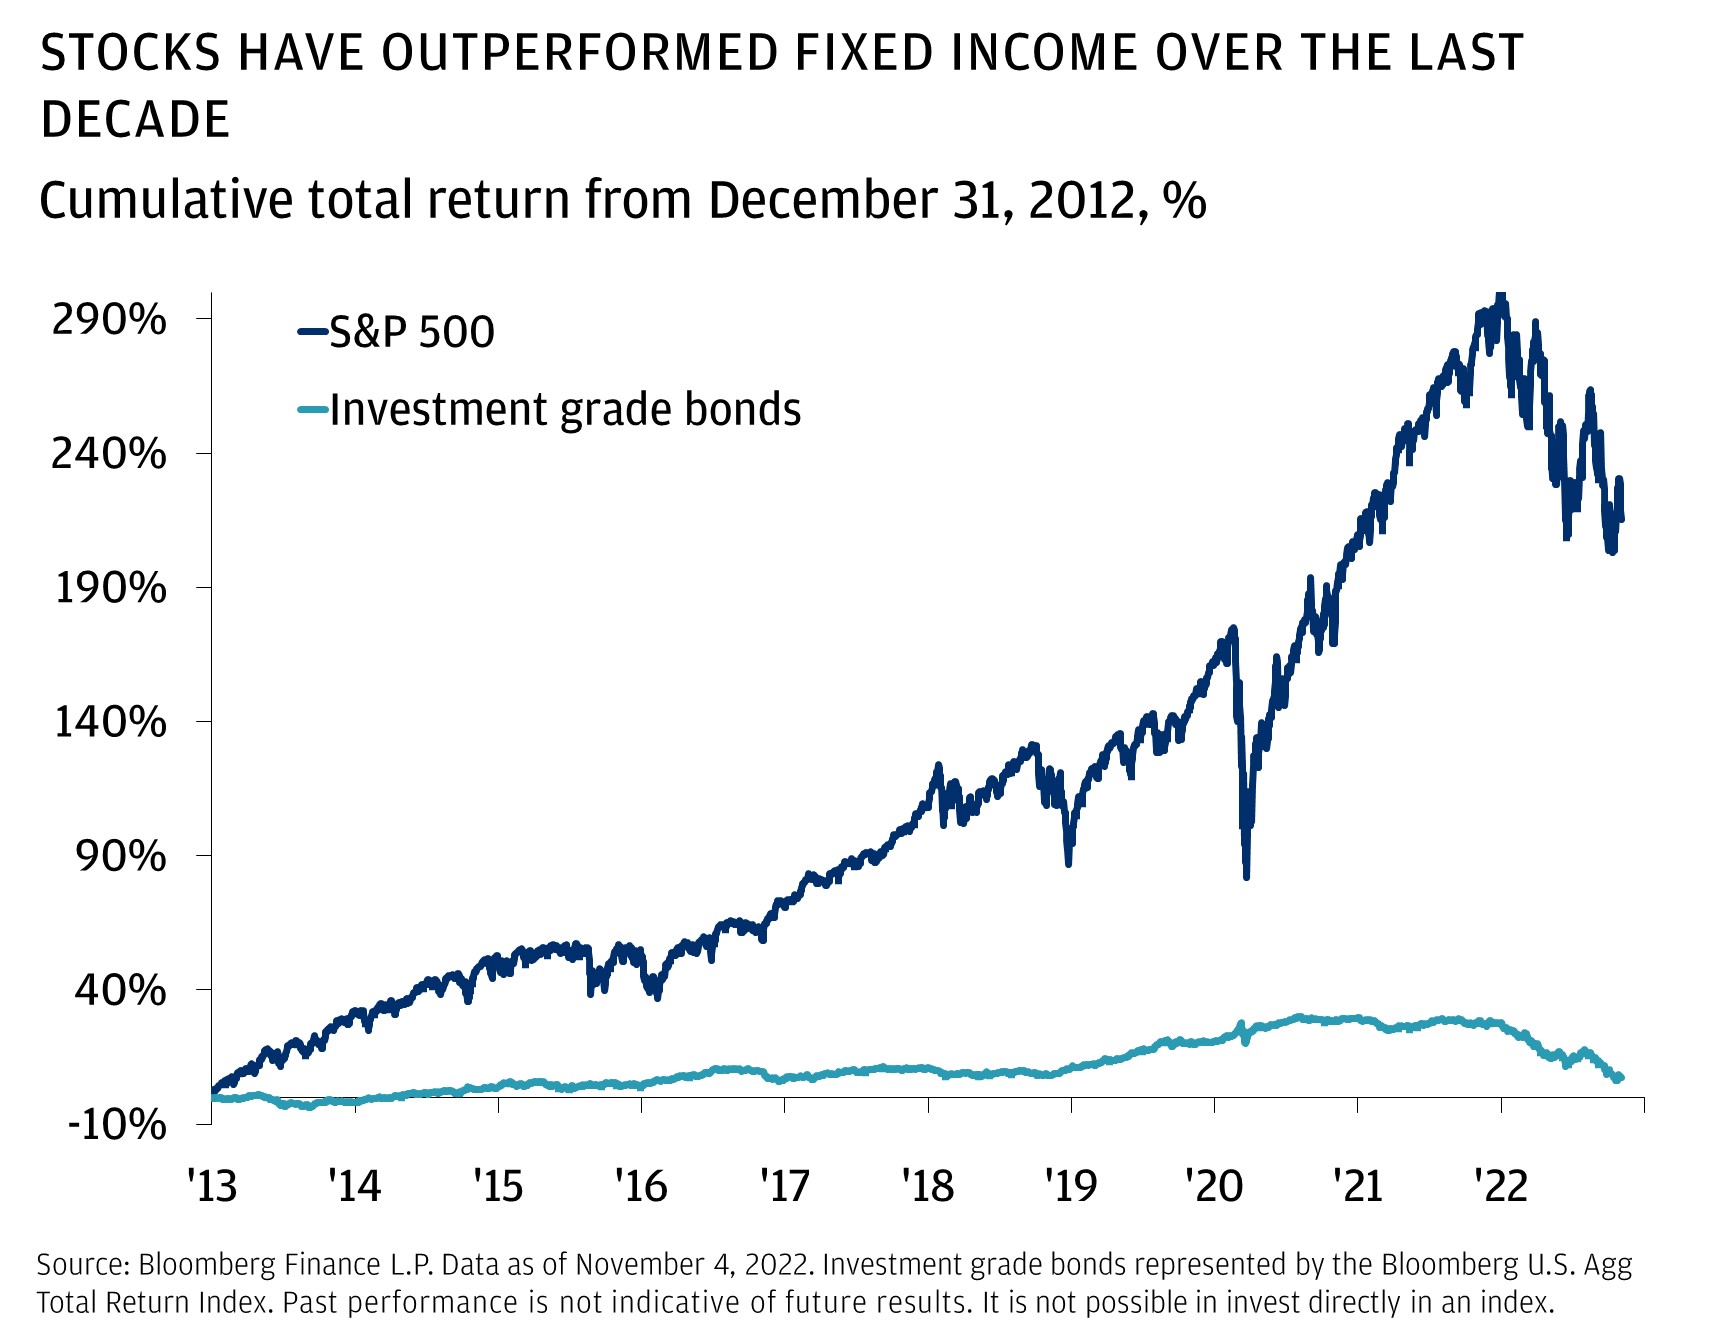 This chart shows the cumulative total return of the S&P 500 and investment grade bonds from December 31, 2012, to November 4, 2022.